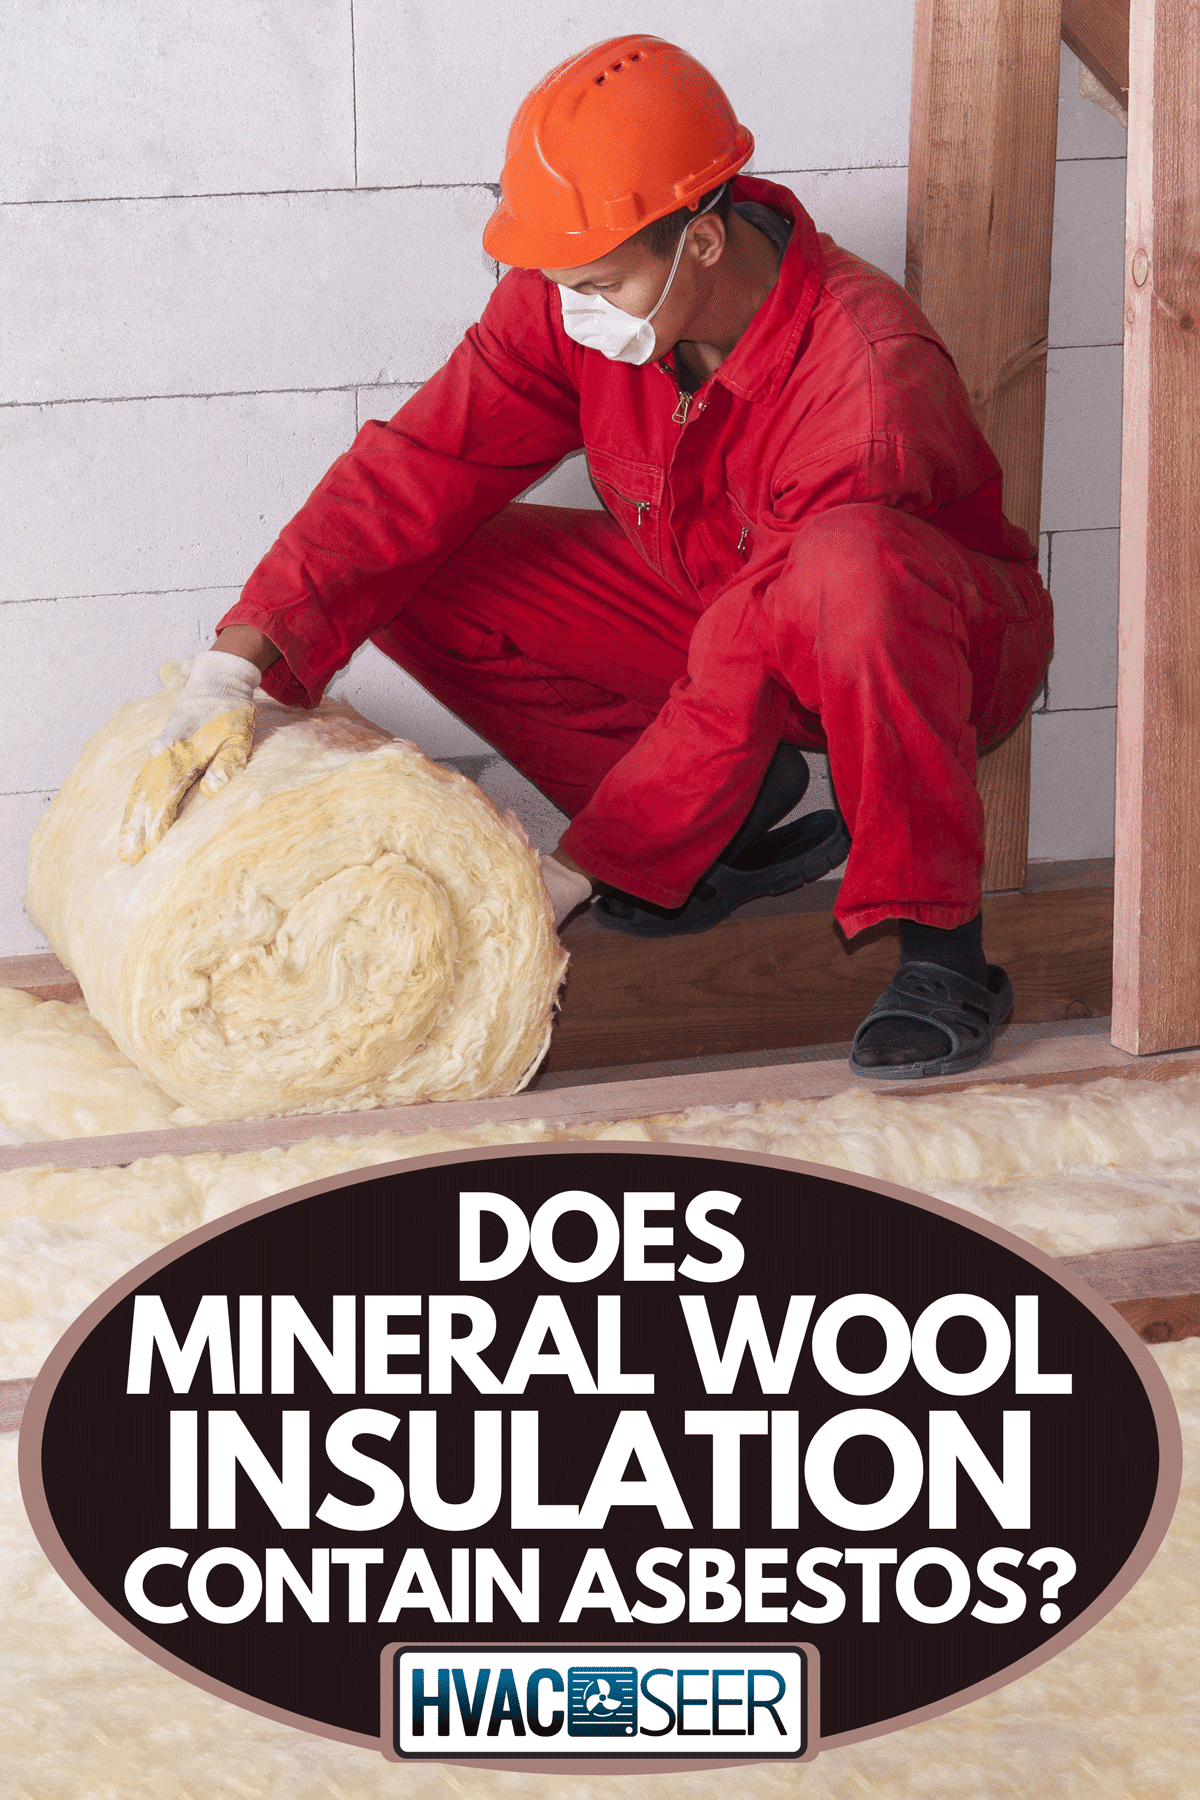 A worker insulates the attic with mineral wool, Does Mineral Wool Insulation Contain Asbestos?